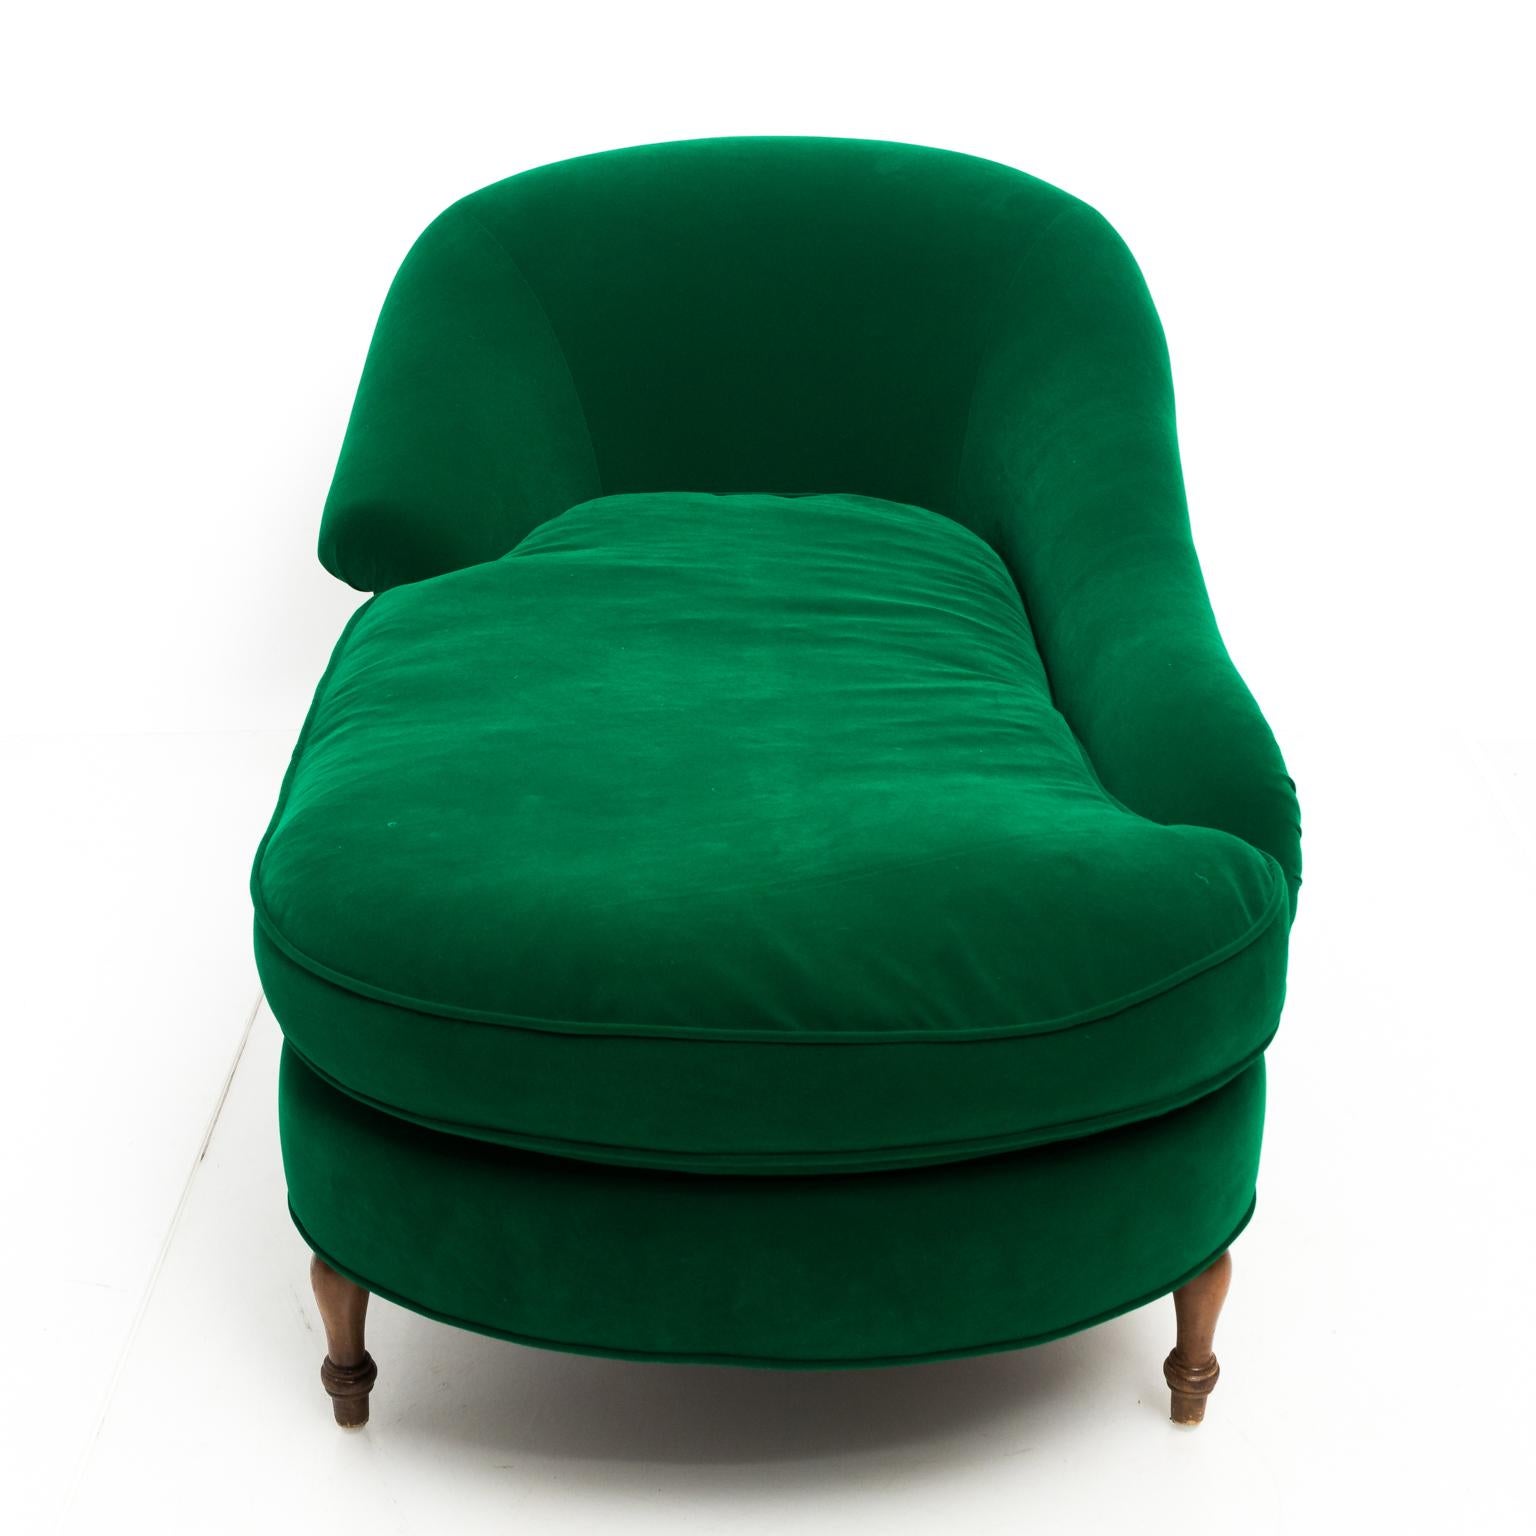 Emerald upholstered chaise lounge chair with curved back and wood vase turned legs, circa 20th century